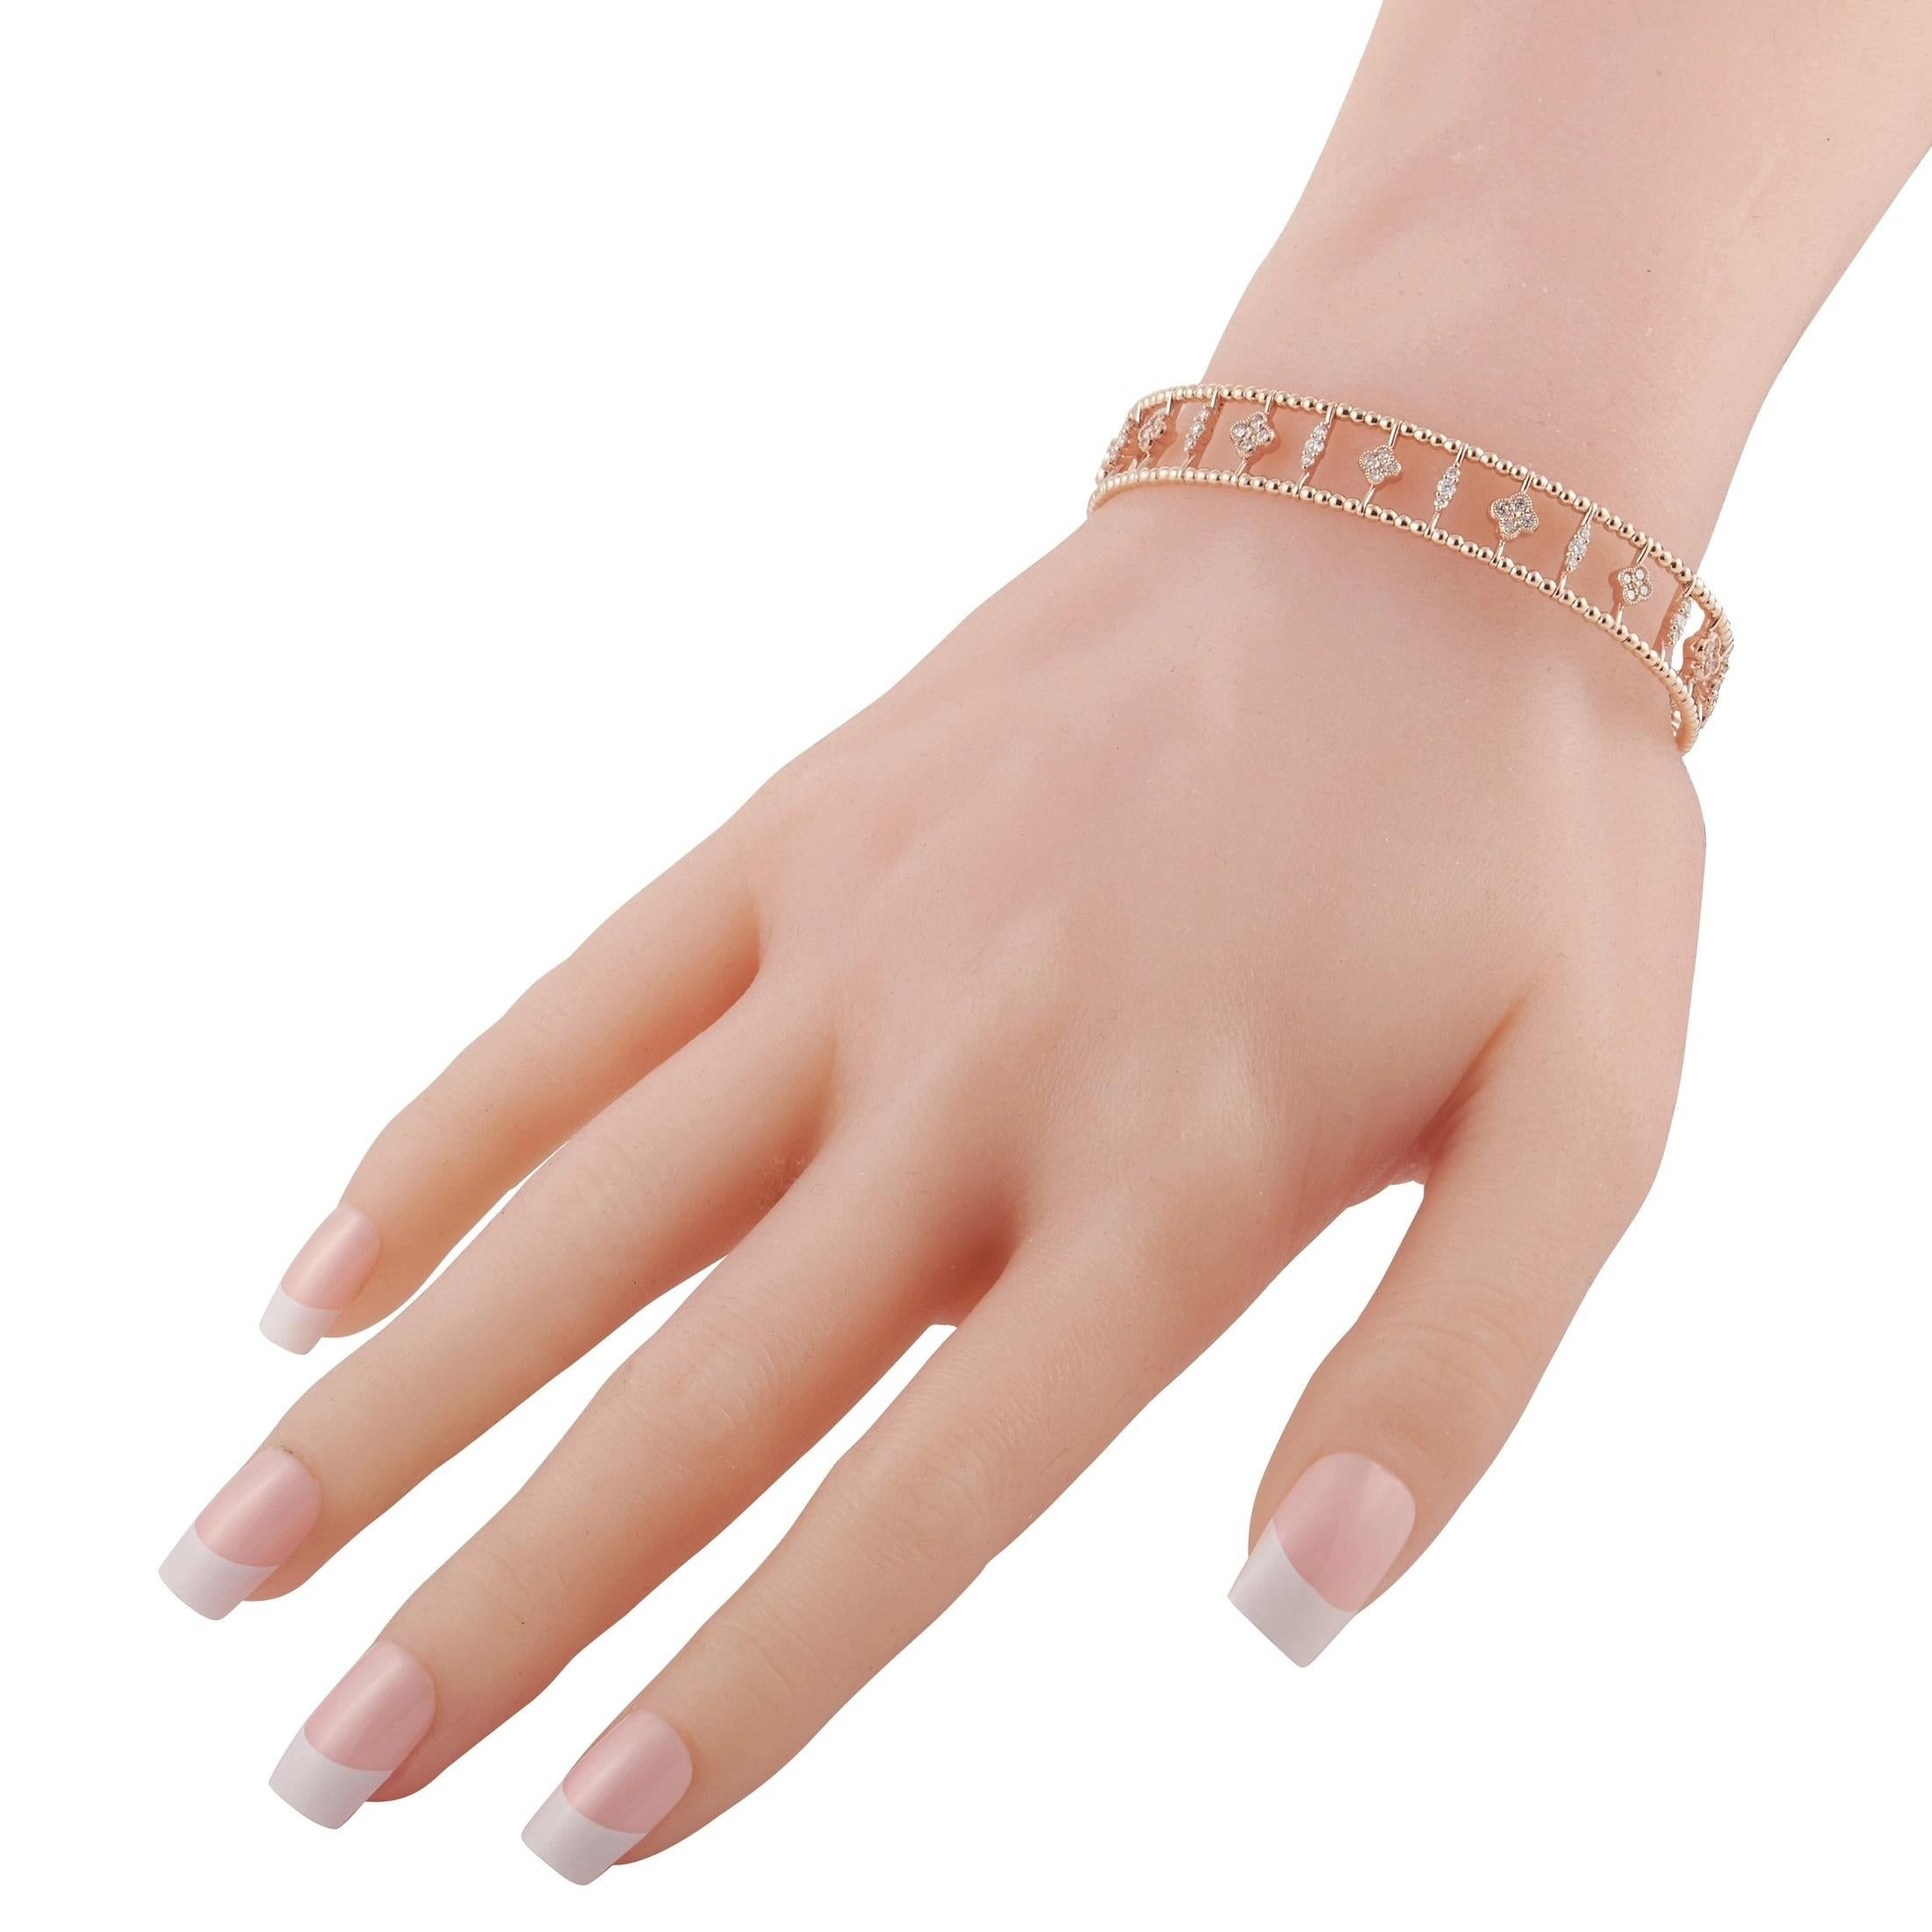 This elegant bracelet is the definition of luxury. Intricate 14K Rose Gold metalwork comes to life thanks to the array of sparkling diamonds totaling 1.22 carats. This bracelet measures 7” long and is poised to become an essential part of any